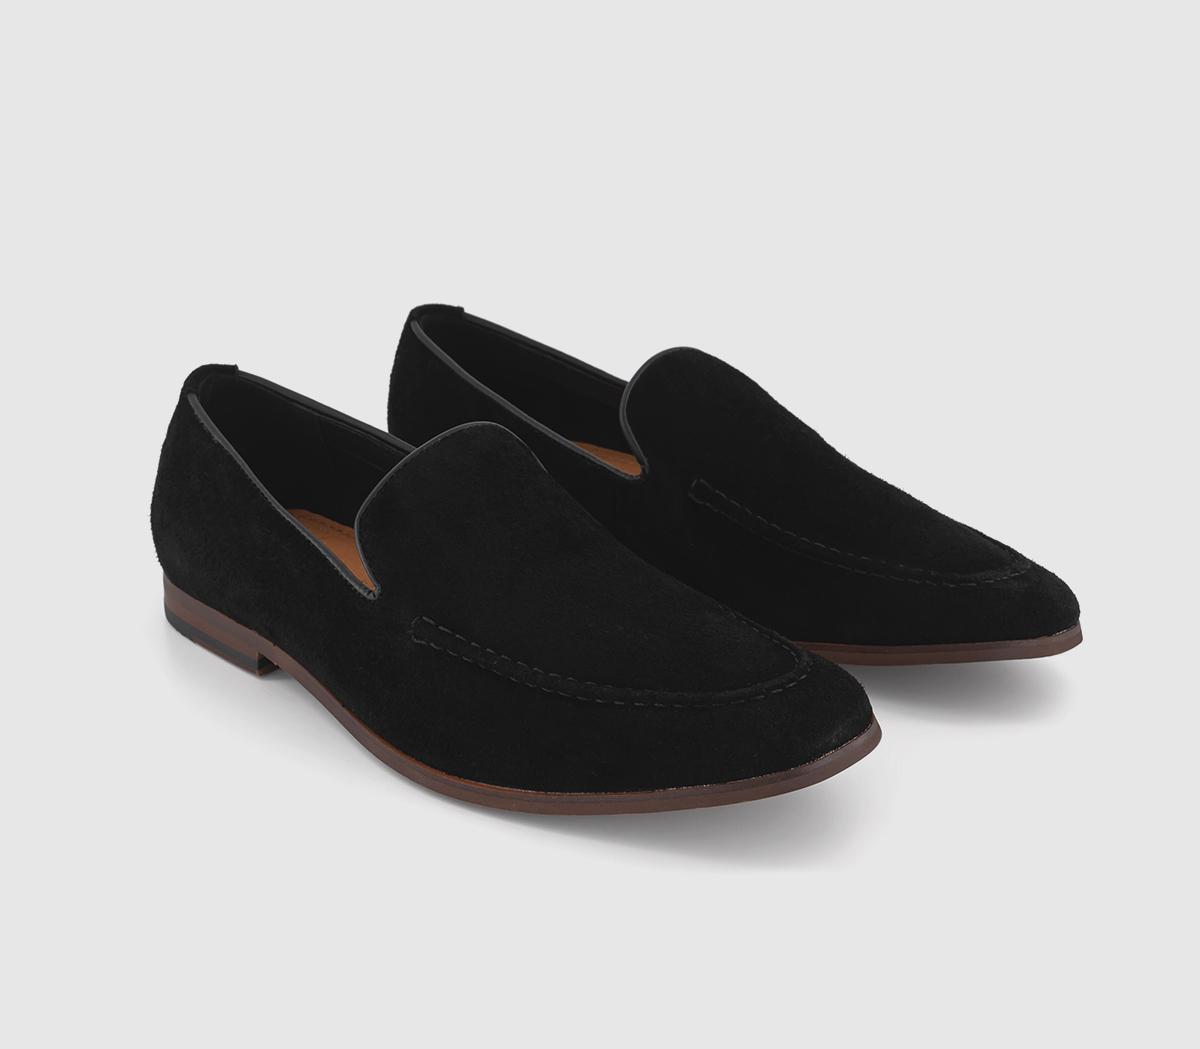 OFFICE Cody Slip On Loafers Black Suede - Men's Casual Shoes